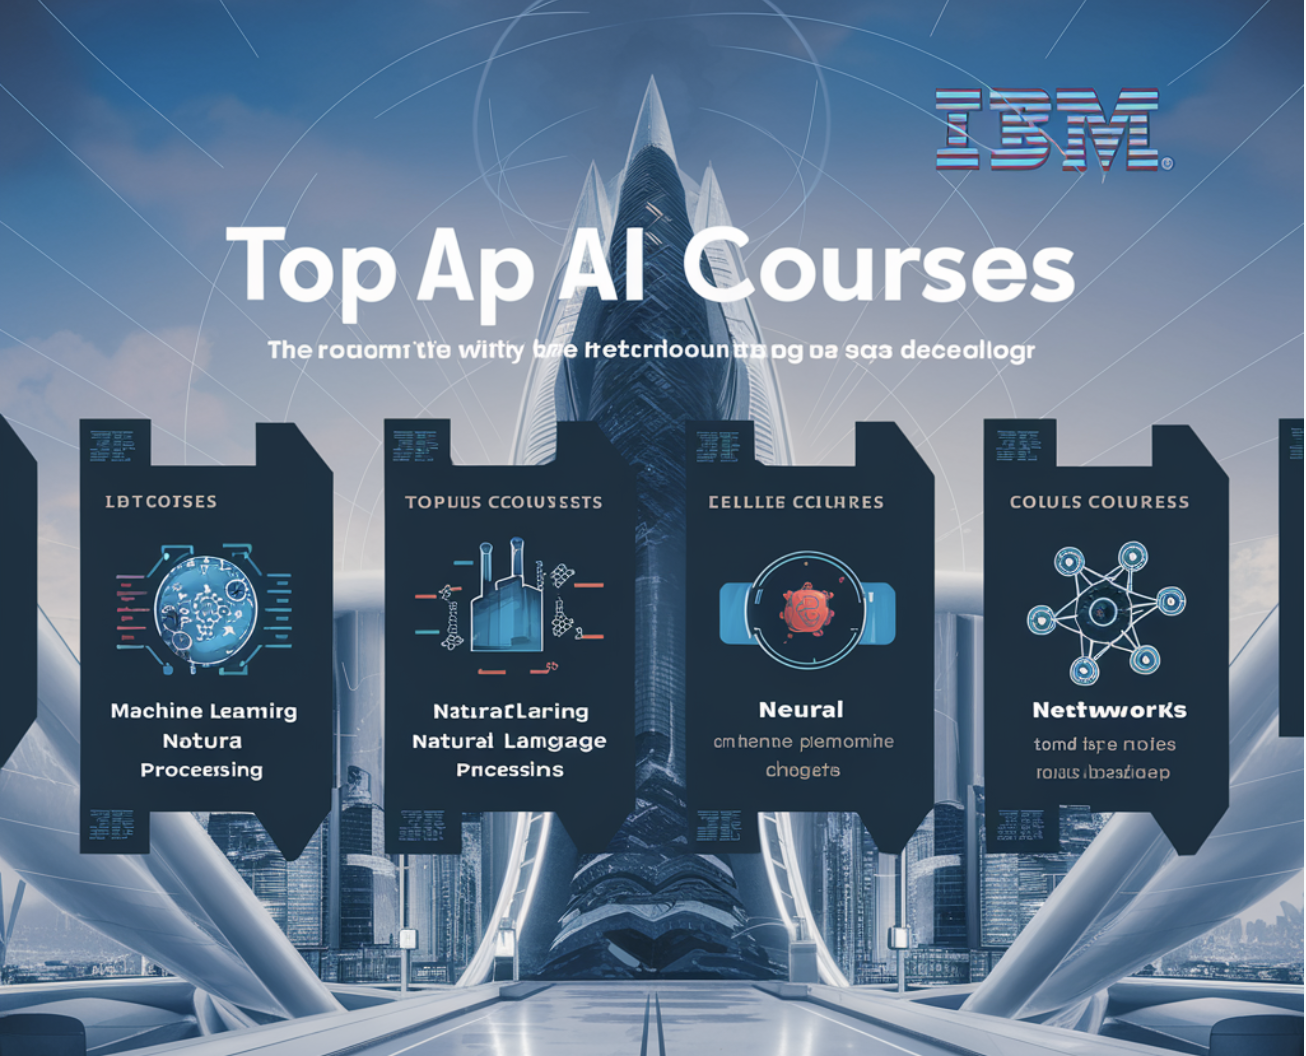  Top AI Courses Offered by IBM